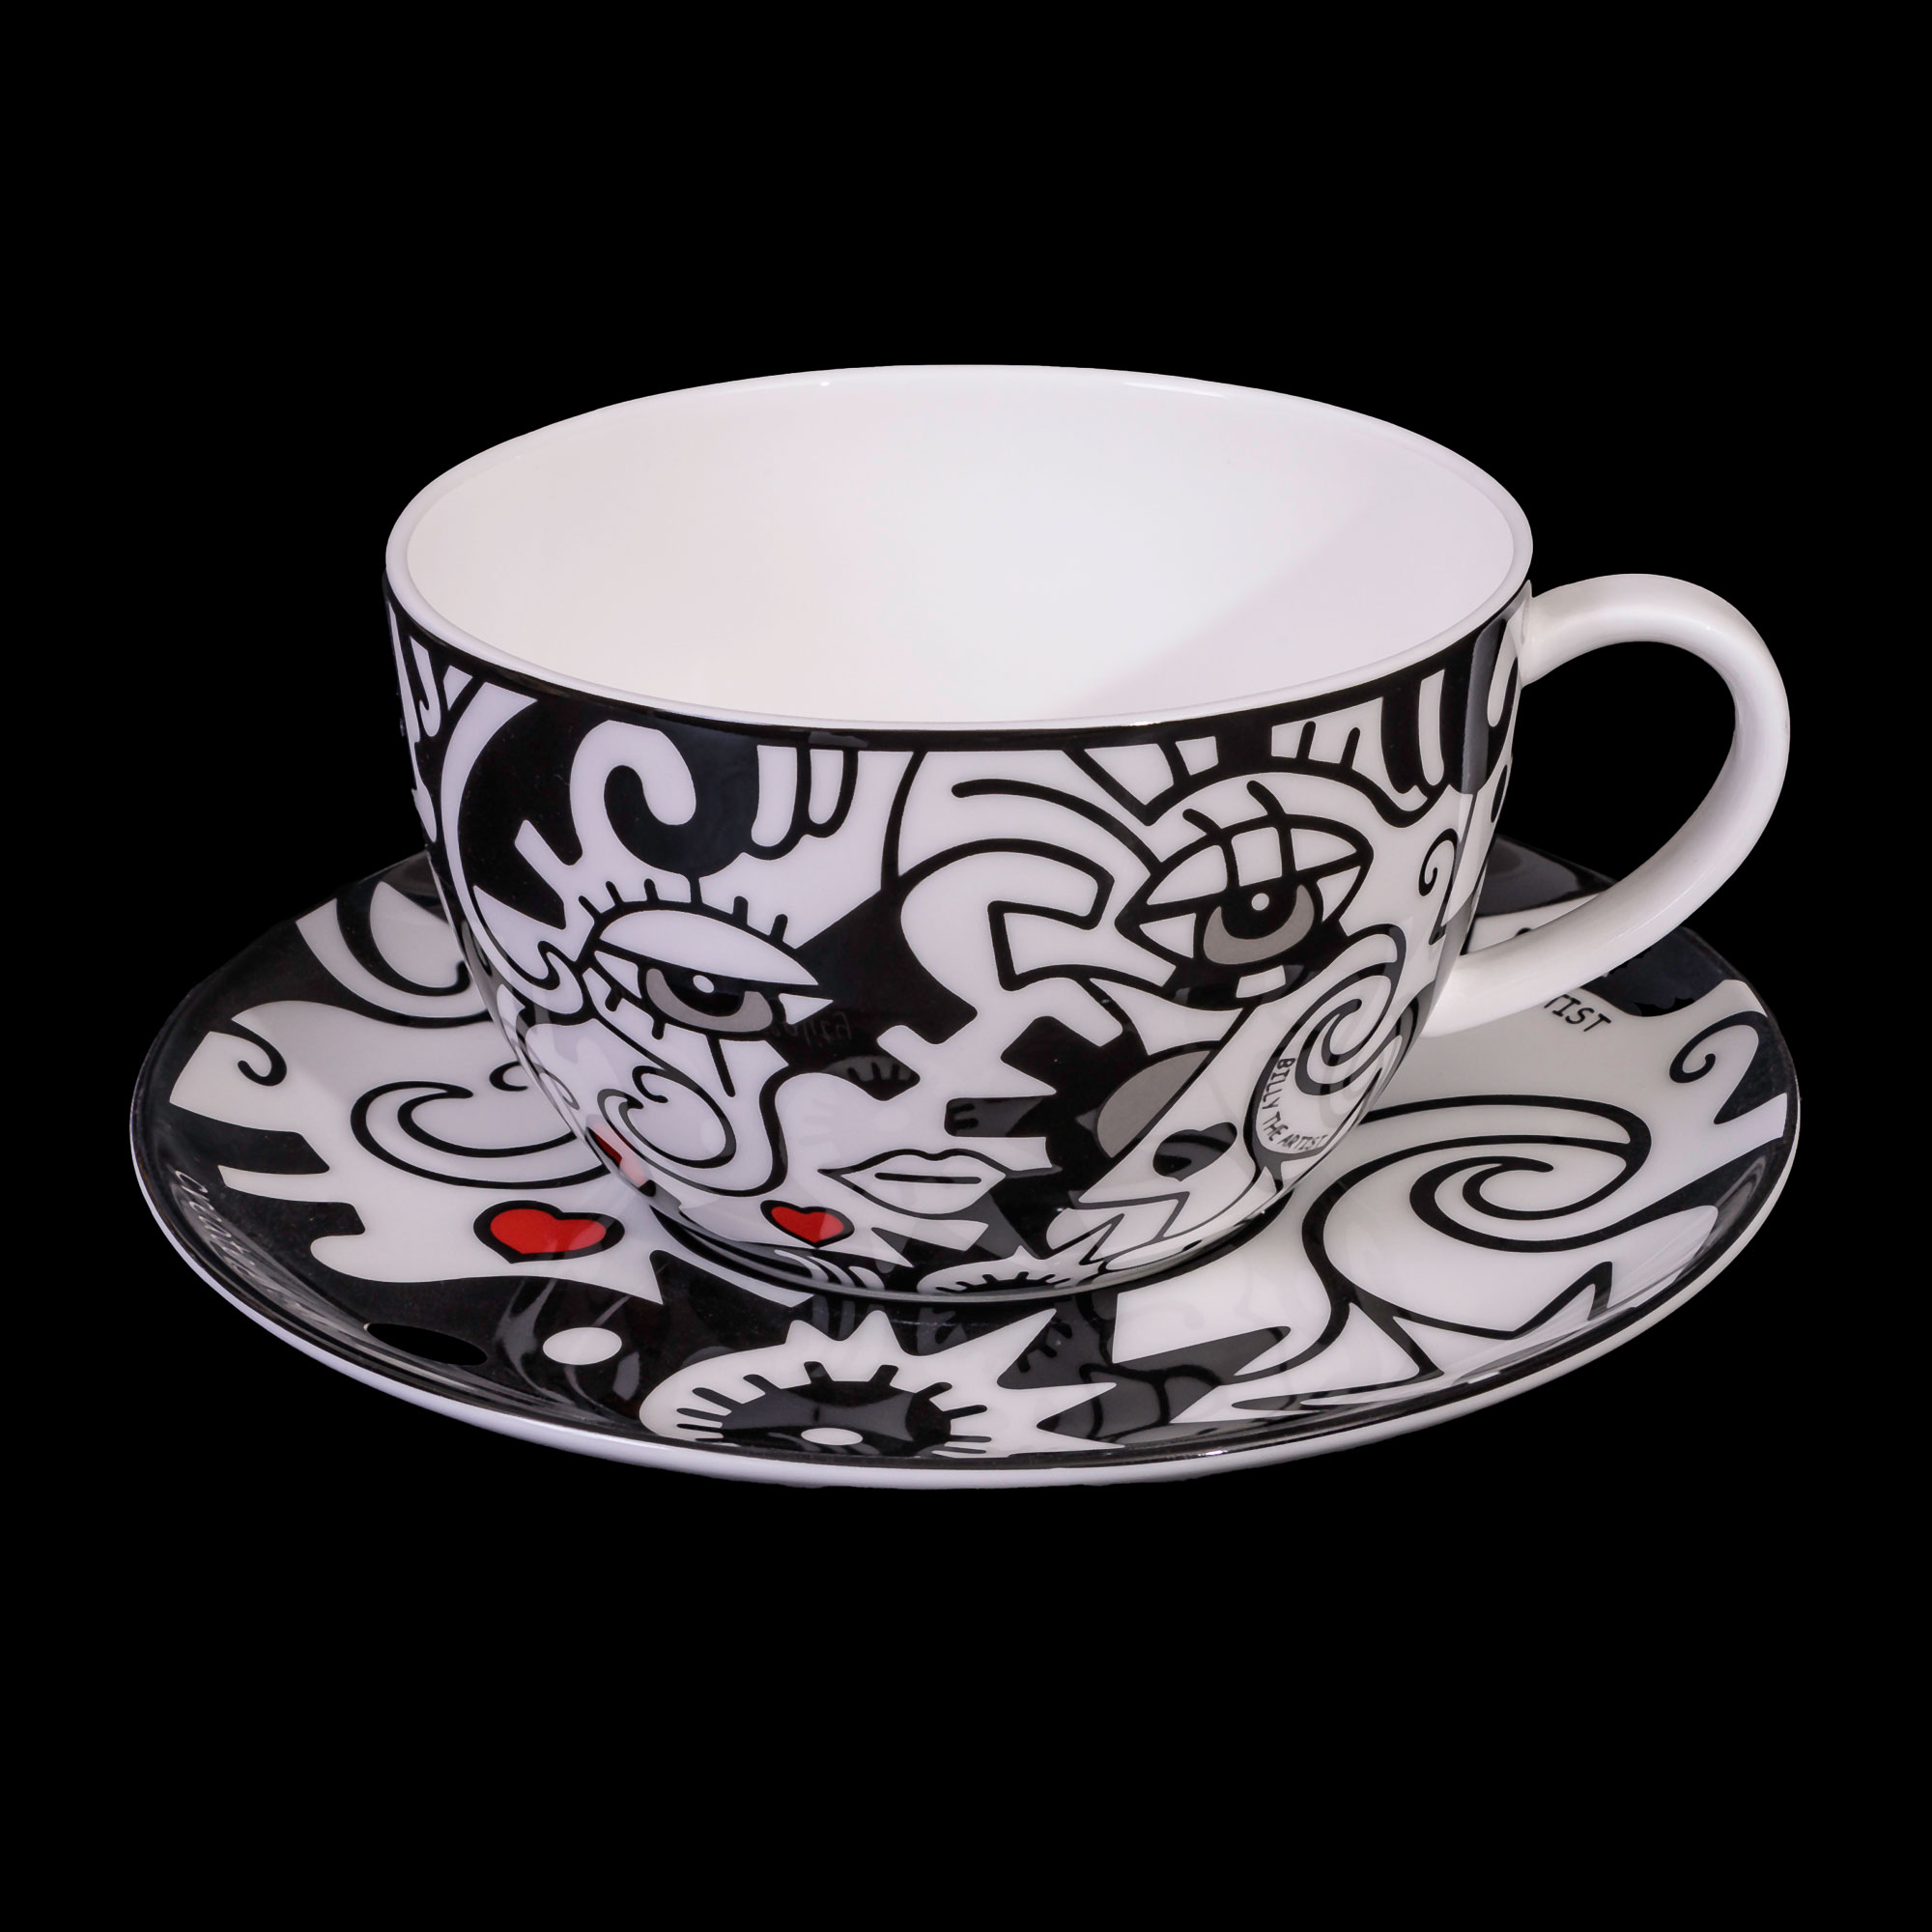 Billy the Artist big teacup saucer and Two : in One (Goebel)